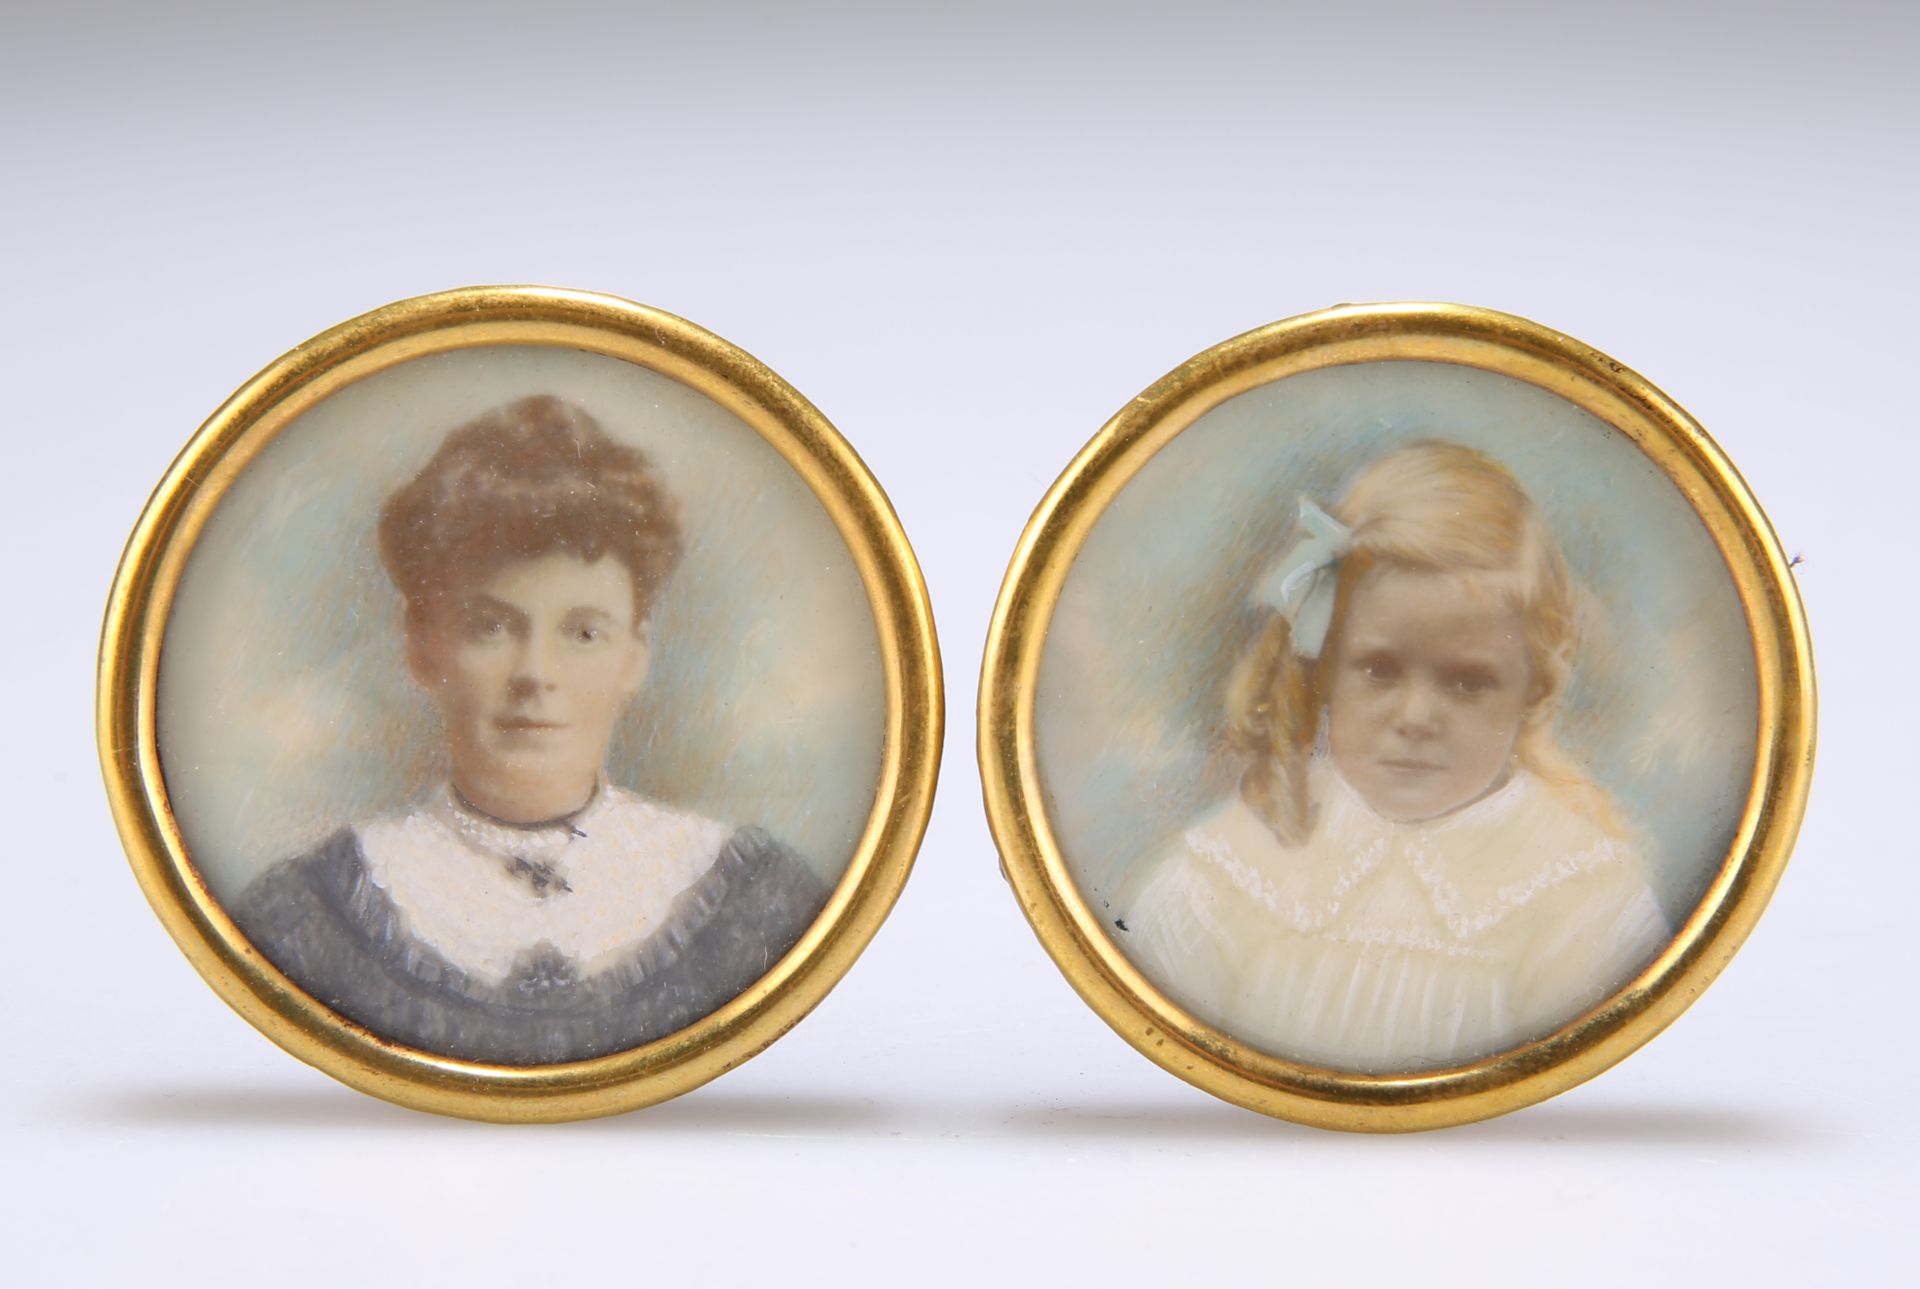 A PAIR OF EARLY 20TH CENTURY PORTRAIT MINIATURES ON IVORY